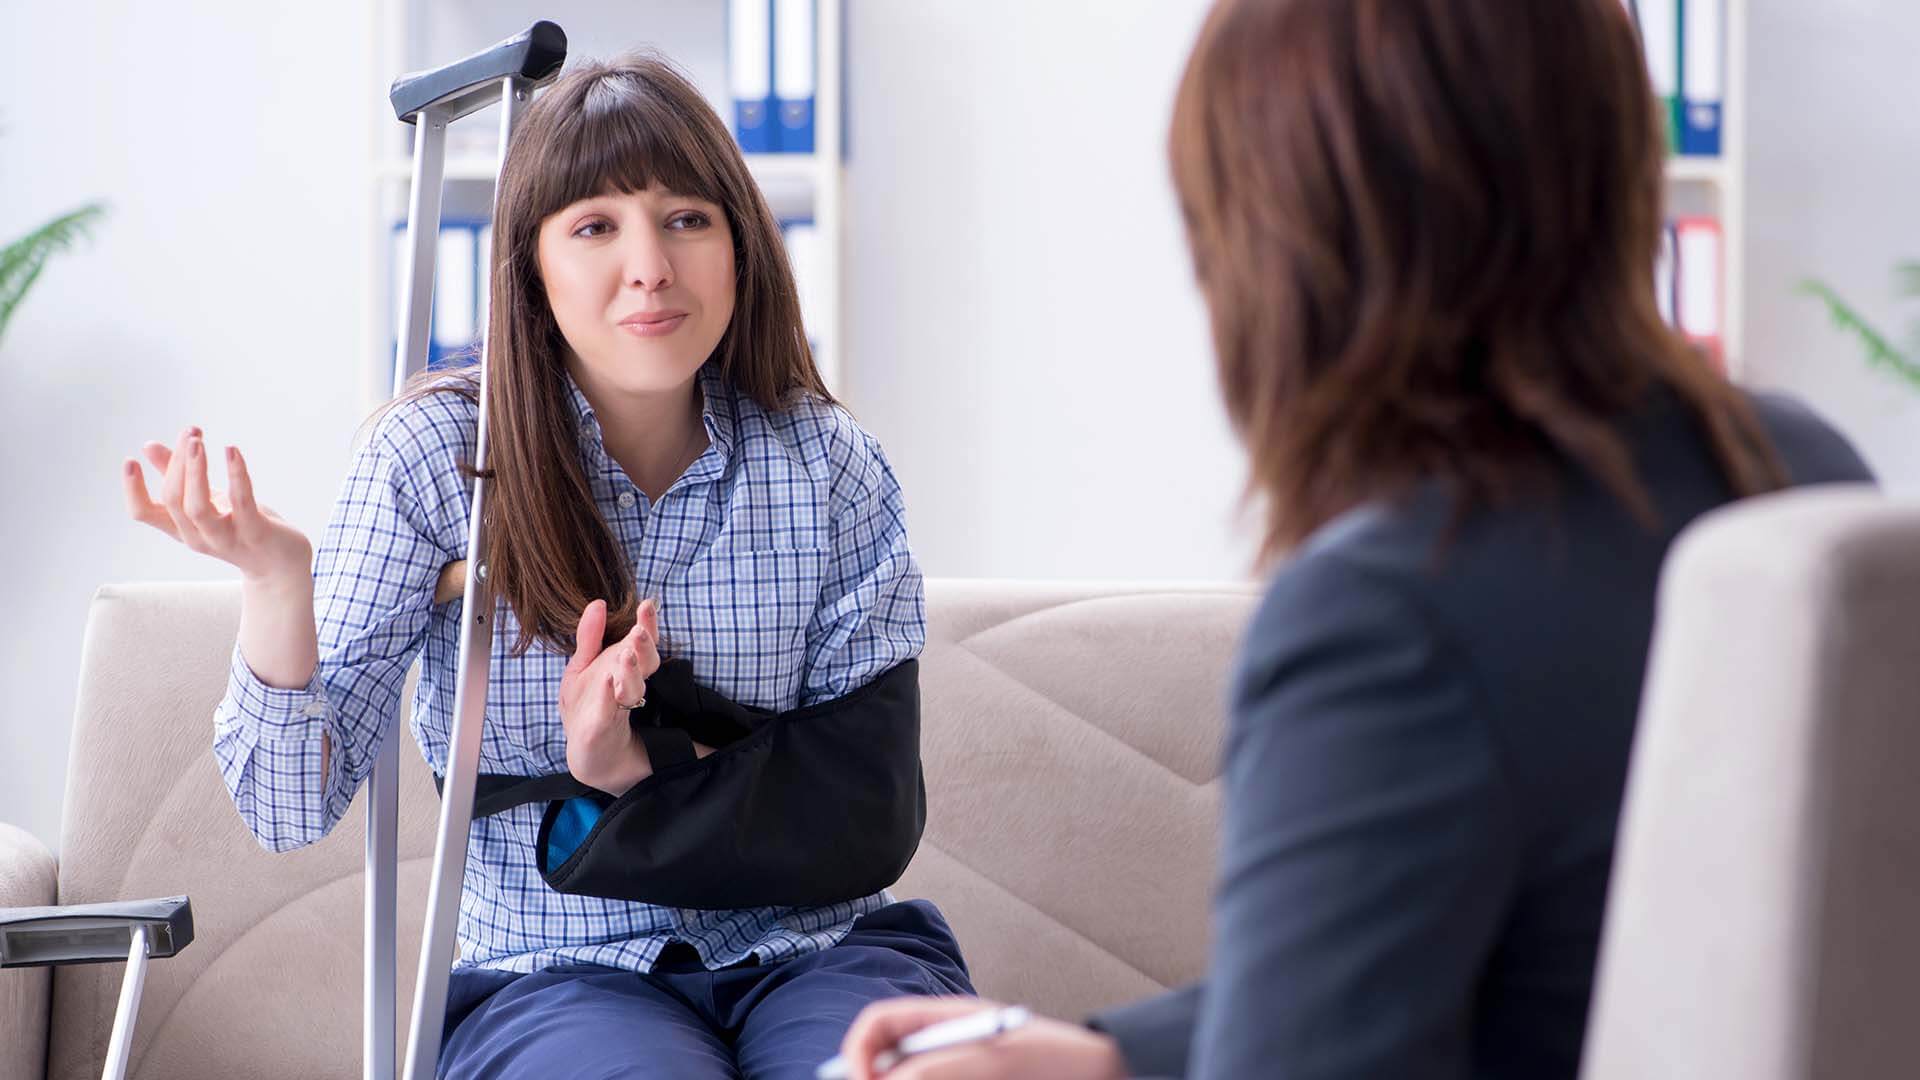 An injured woman on crutches explains her personal injury claim to a female lawyer or attorney as they decide if she should settle her case or go to court